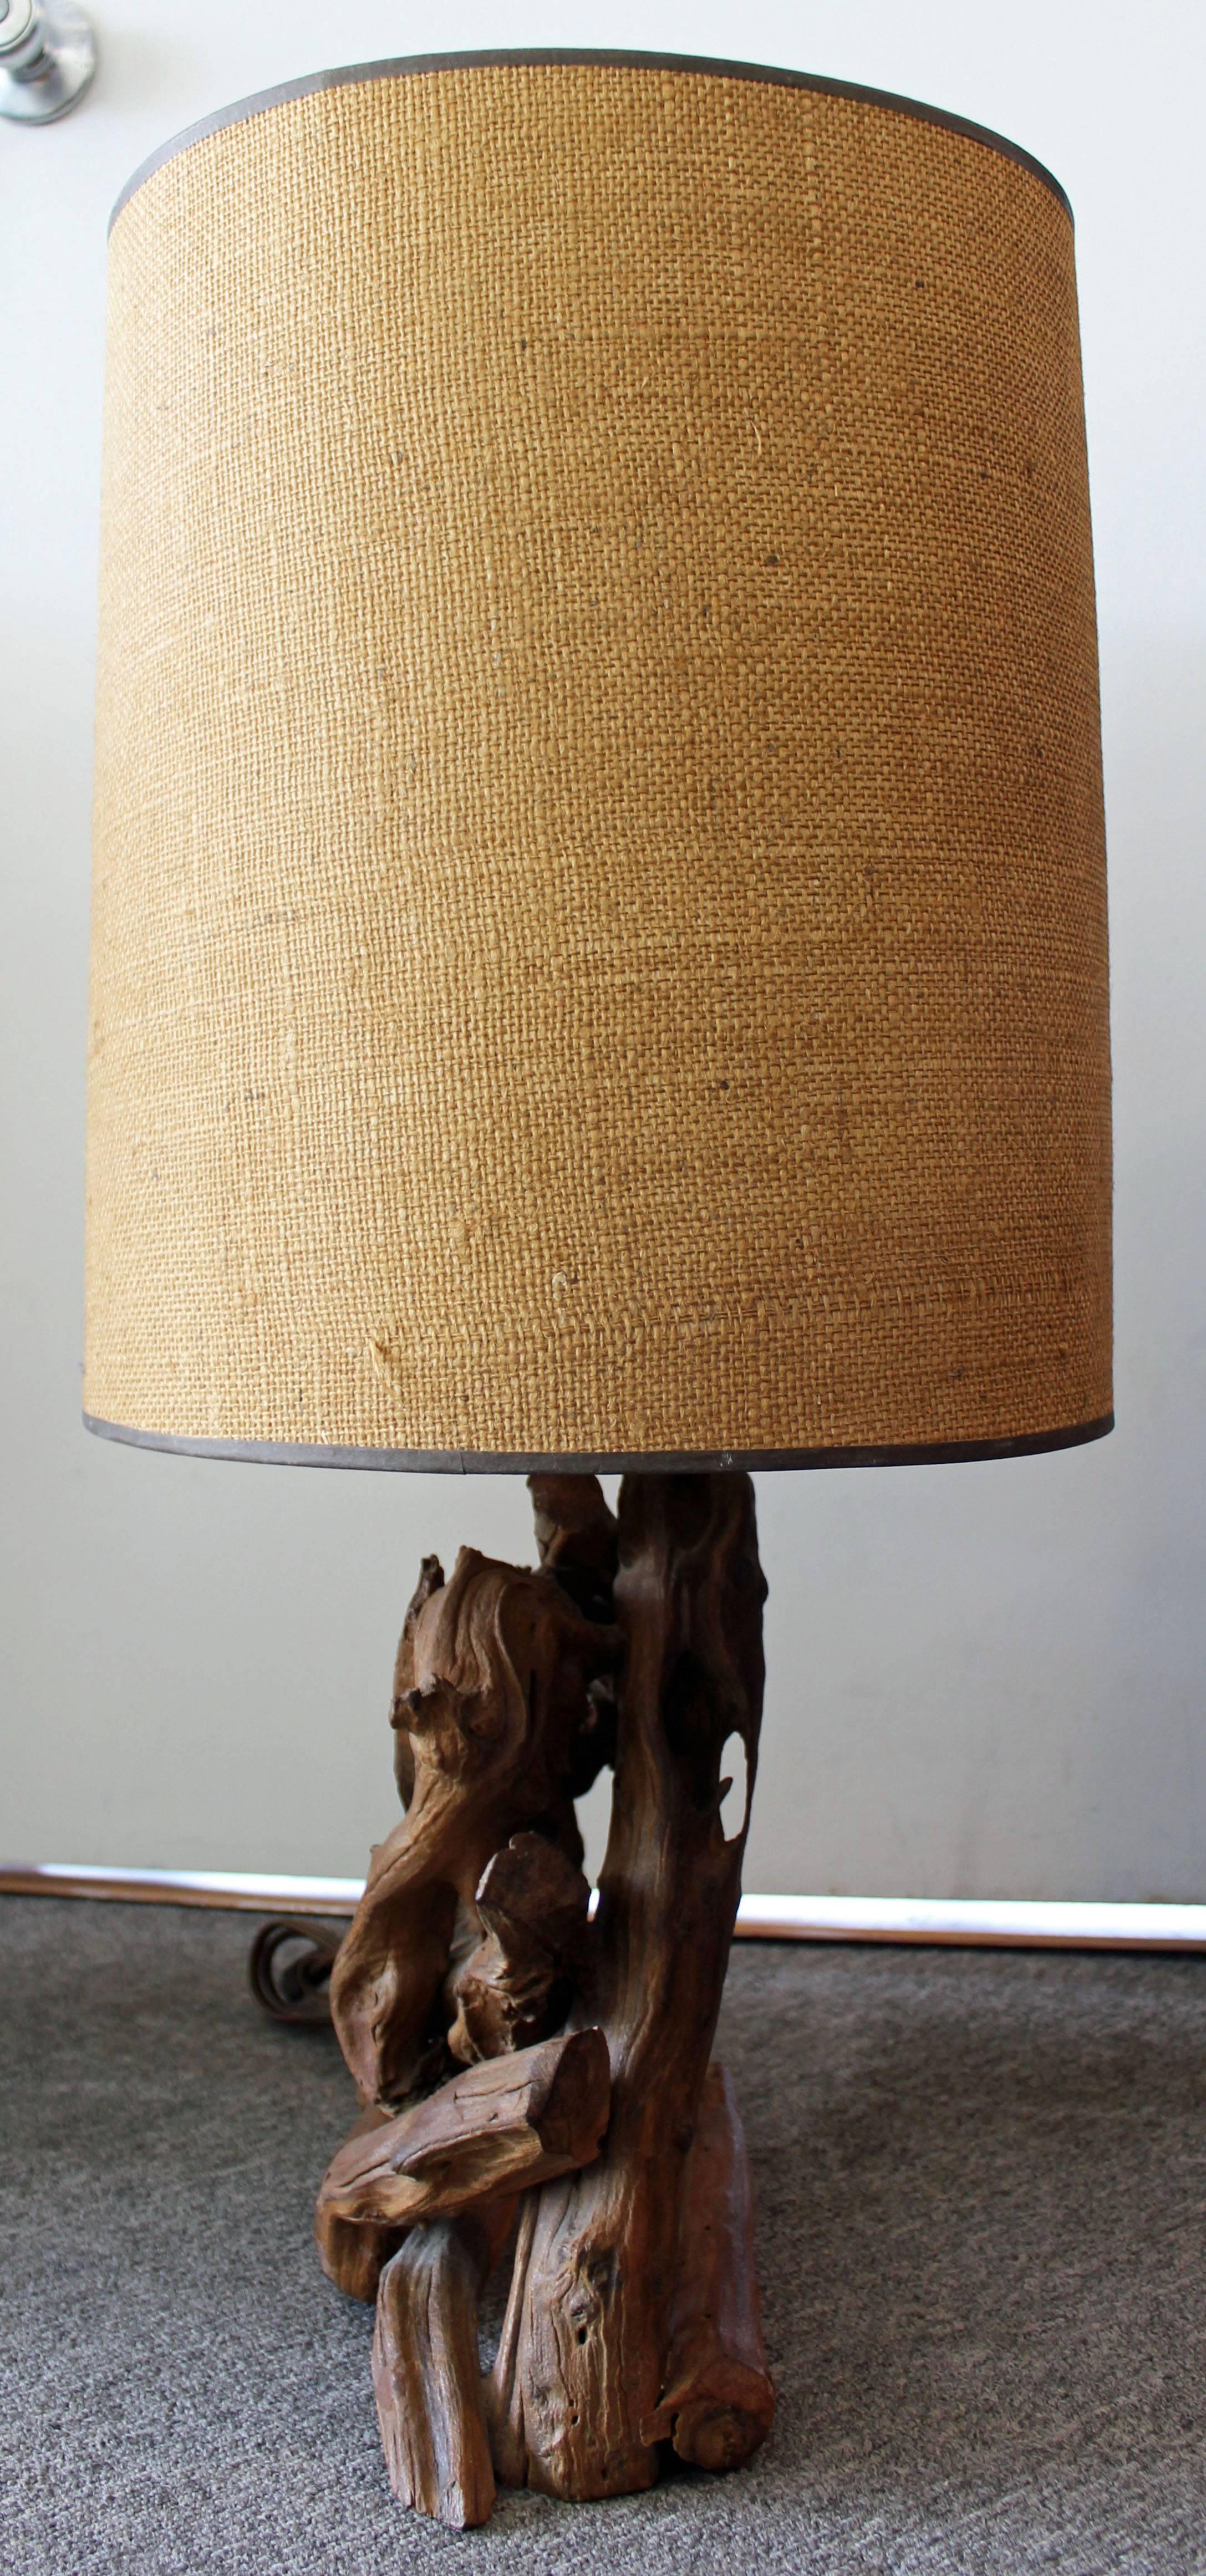 This Mid-Century Modern lamp is very unique, made of driftwood. It is in good, working condition. Lamp shade not included.

Dimensions:
12.5